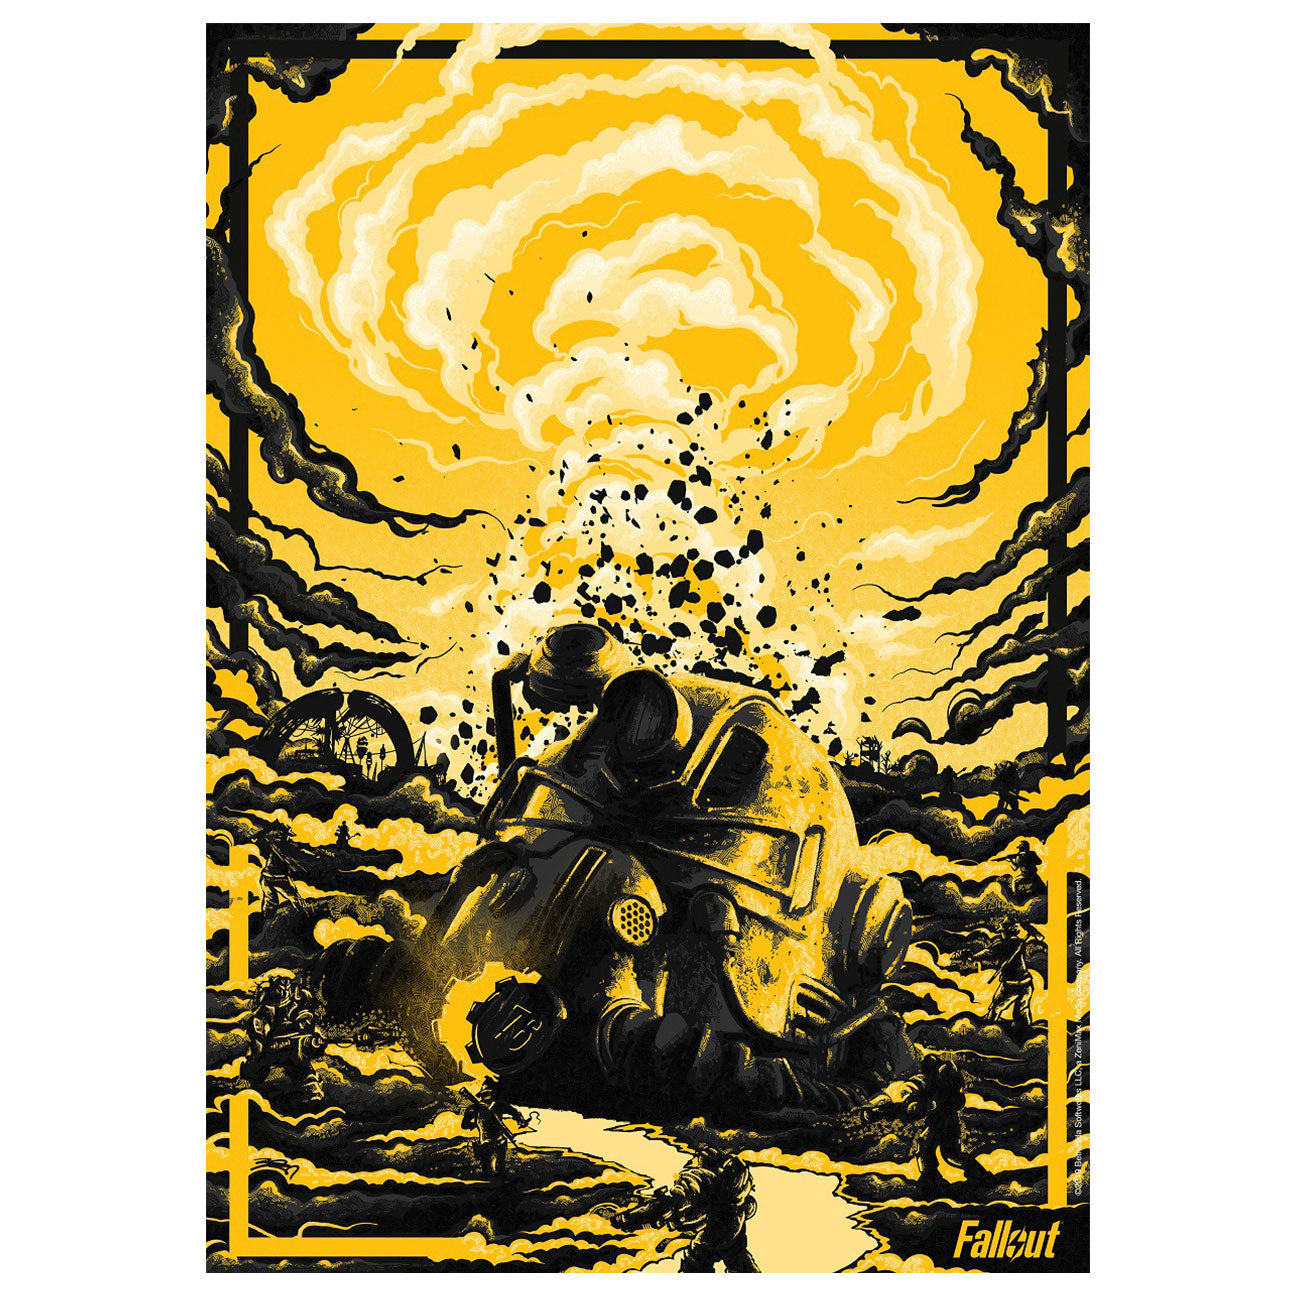 Fallout Limited Edition Art Print